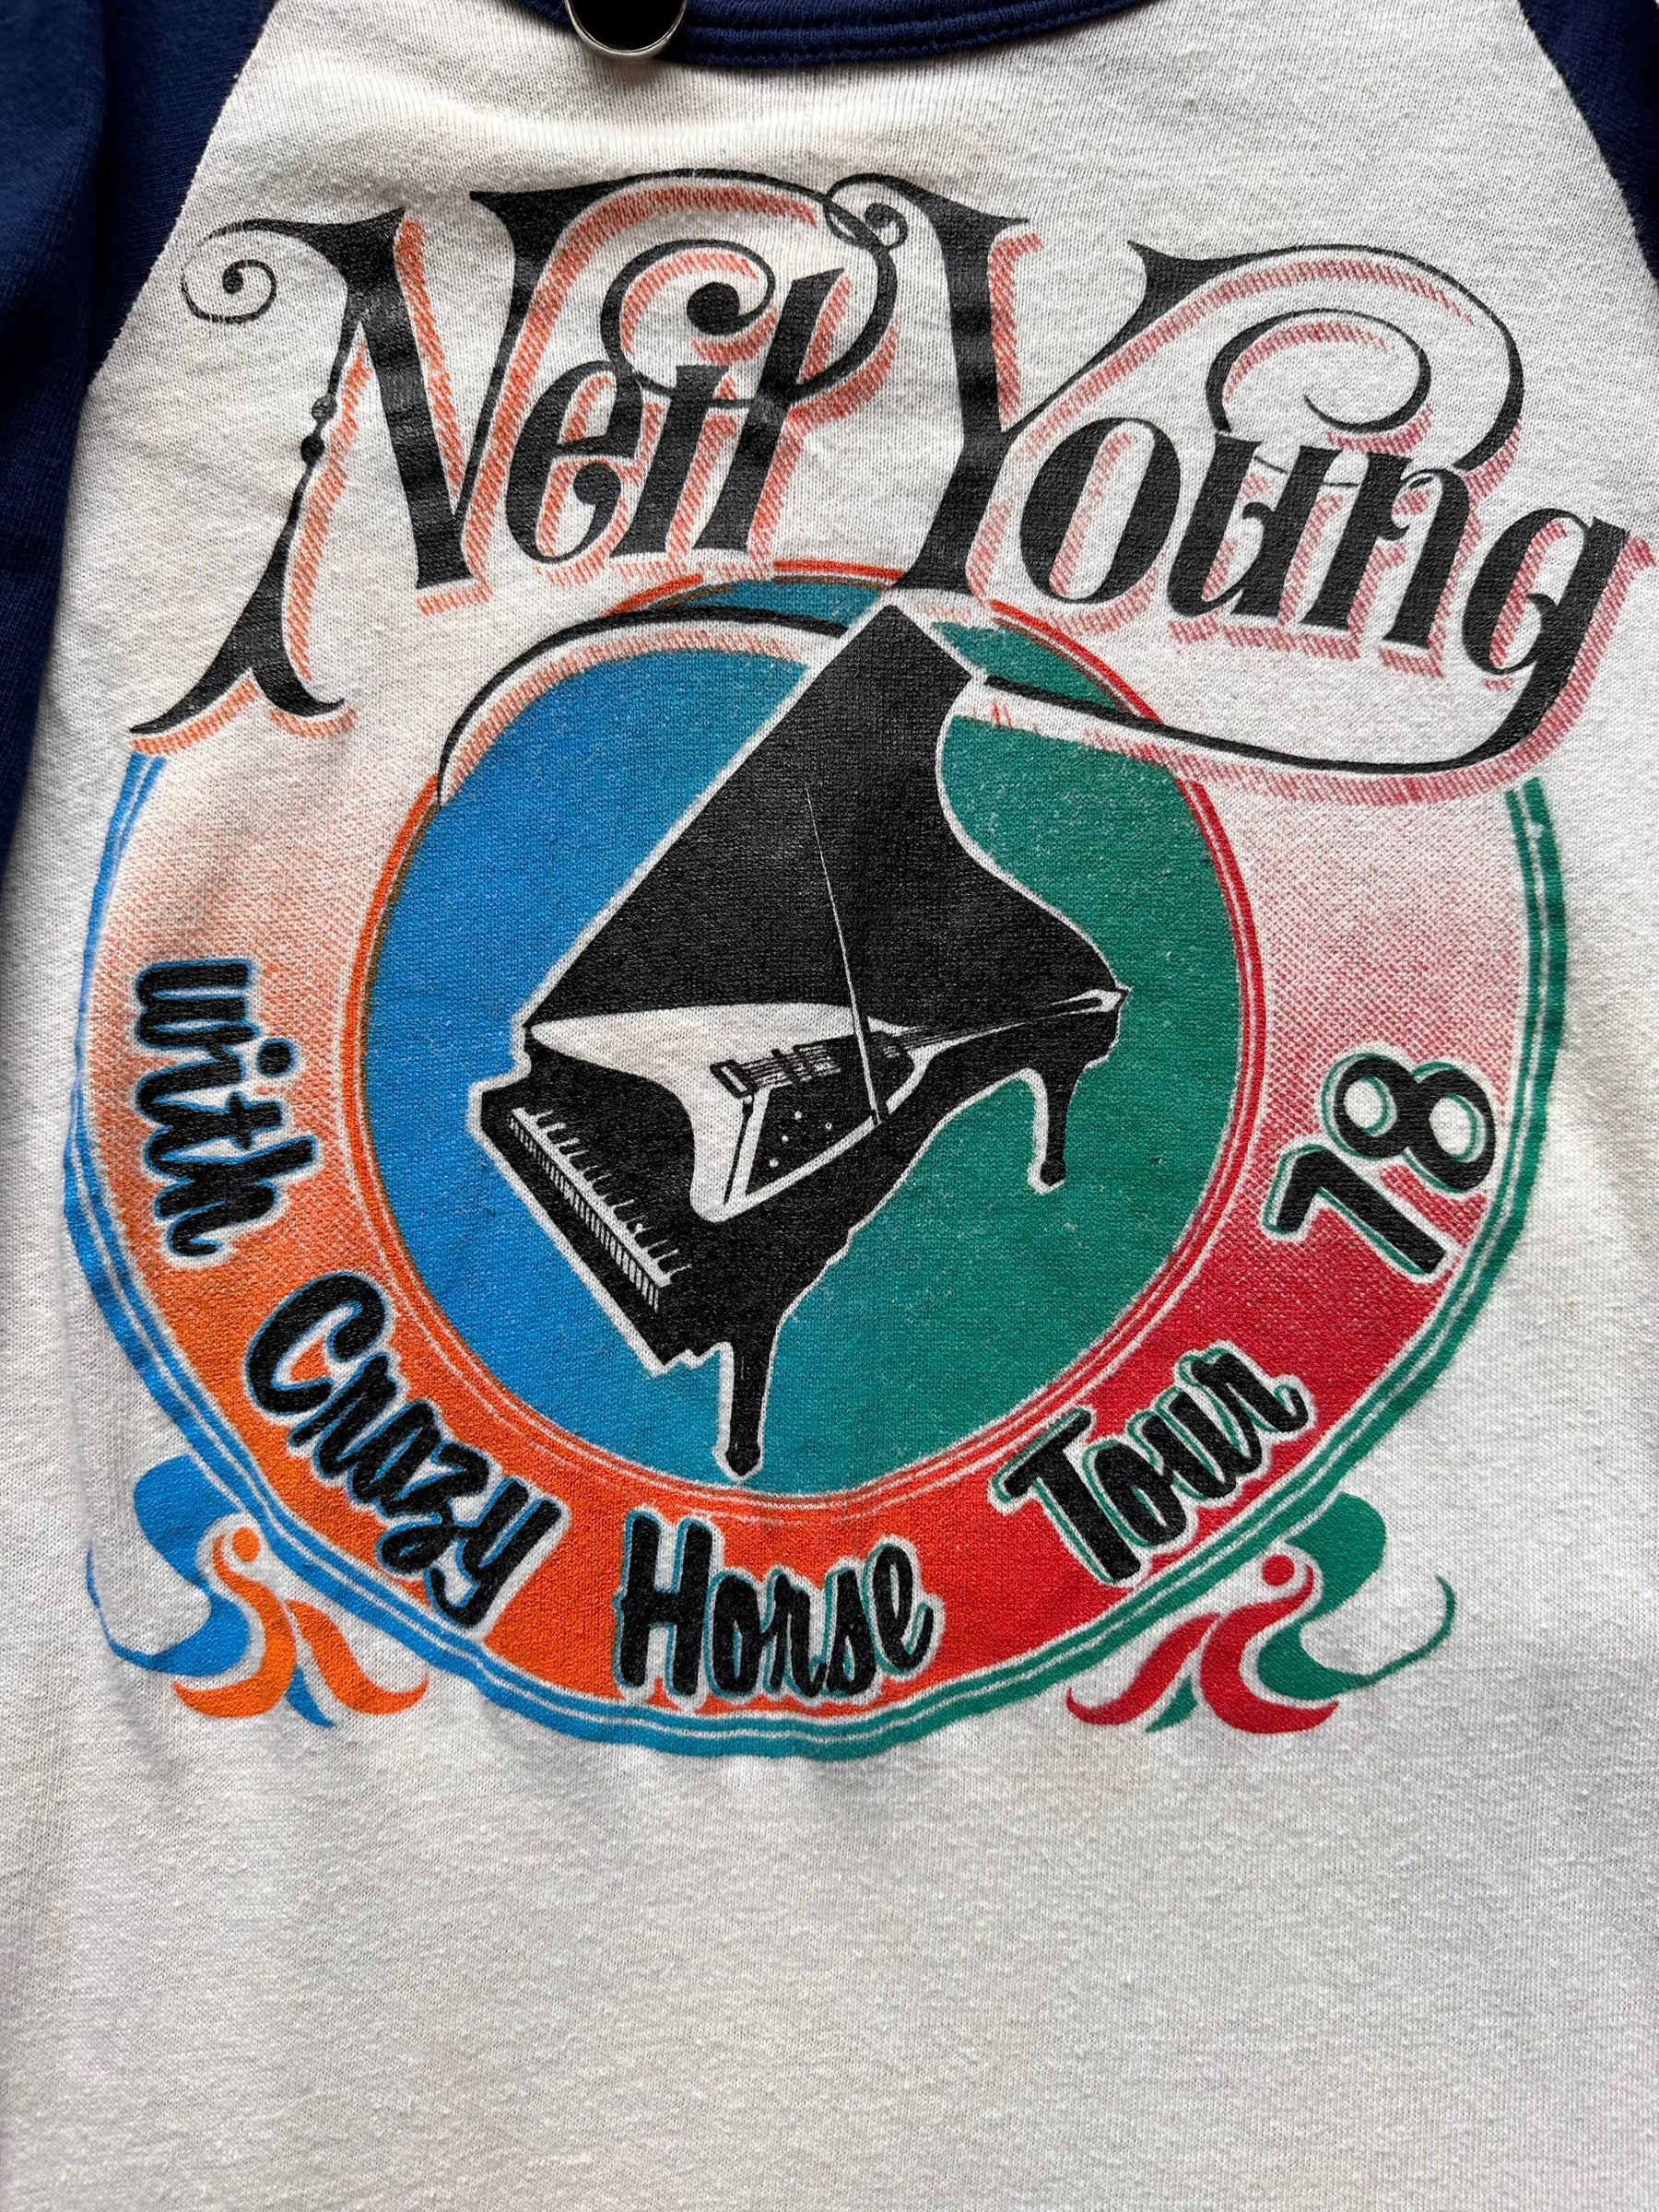 Graphic Detail on Vintage Neil Young & Crazy Horse 1978 Tour Tee SZ XL |  Barn Owl Vintage Clothing | Vintage Neil Young Tees Seattle